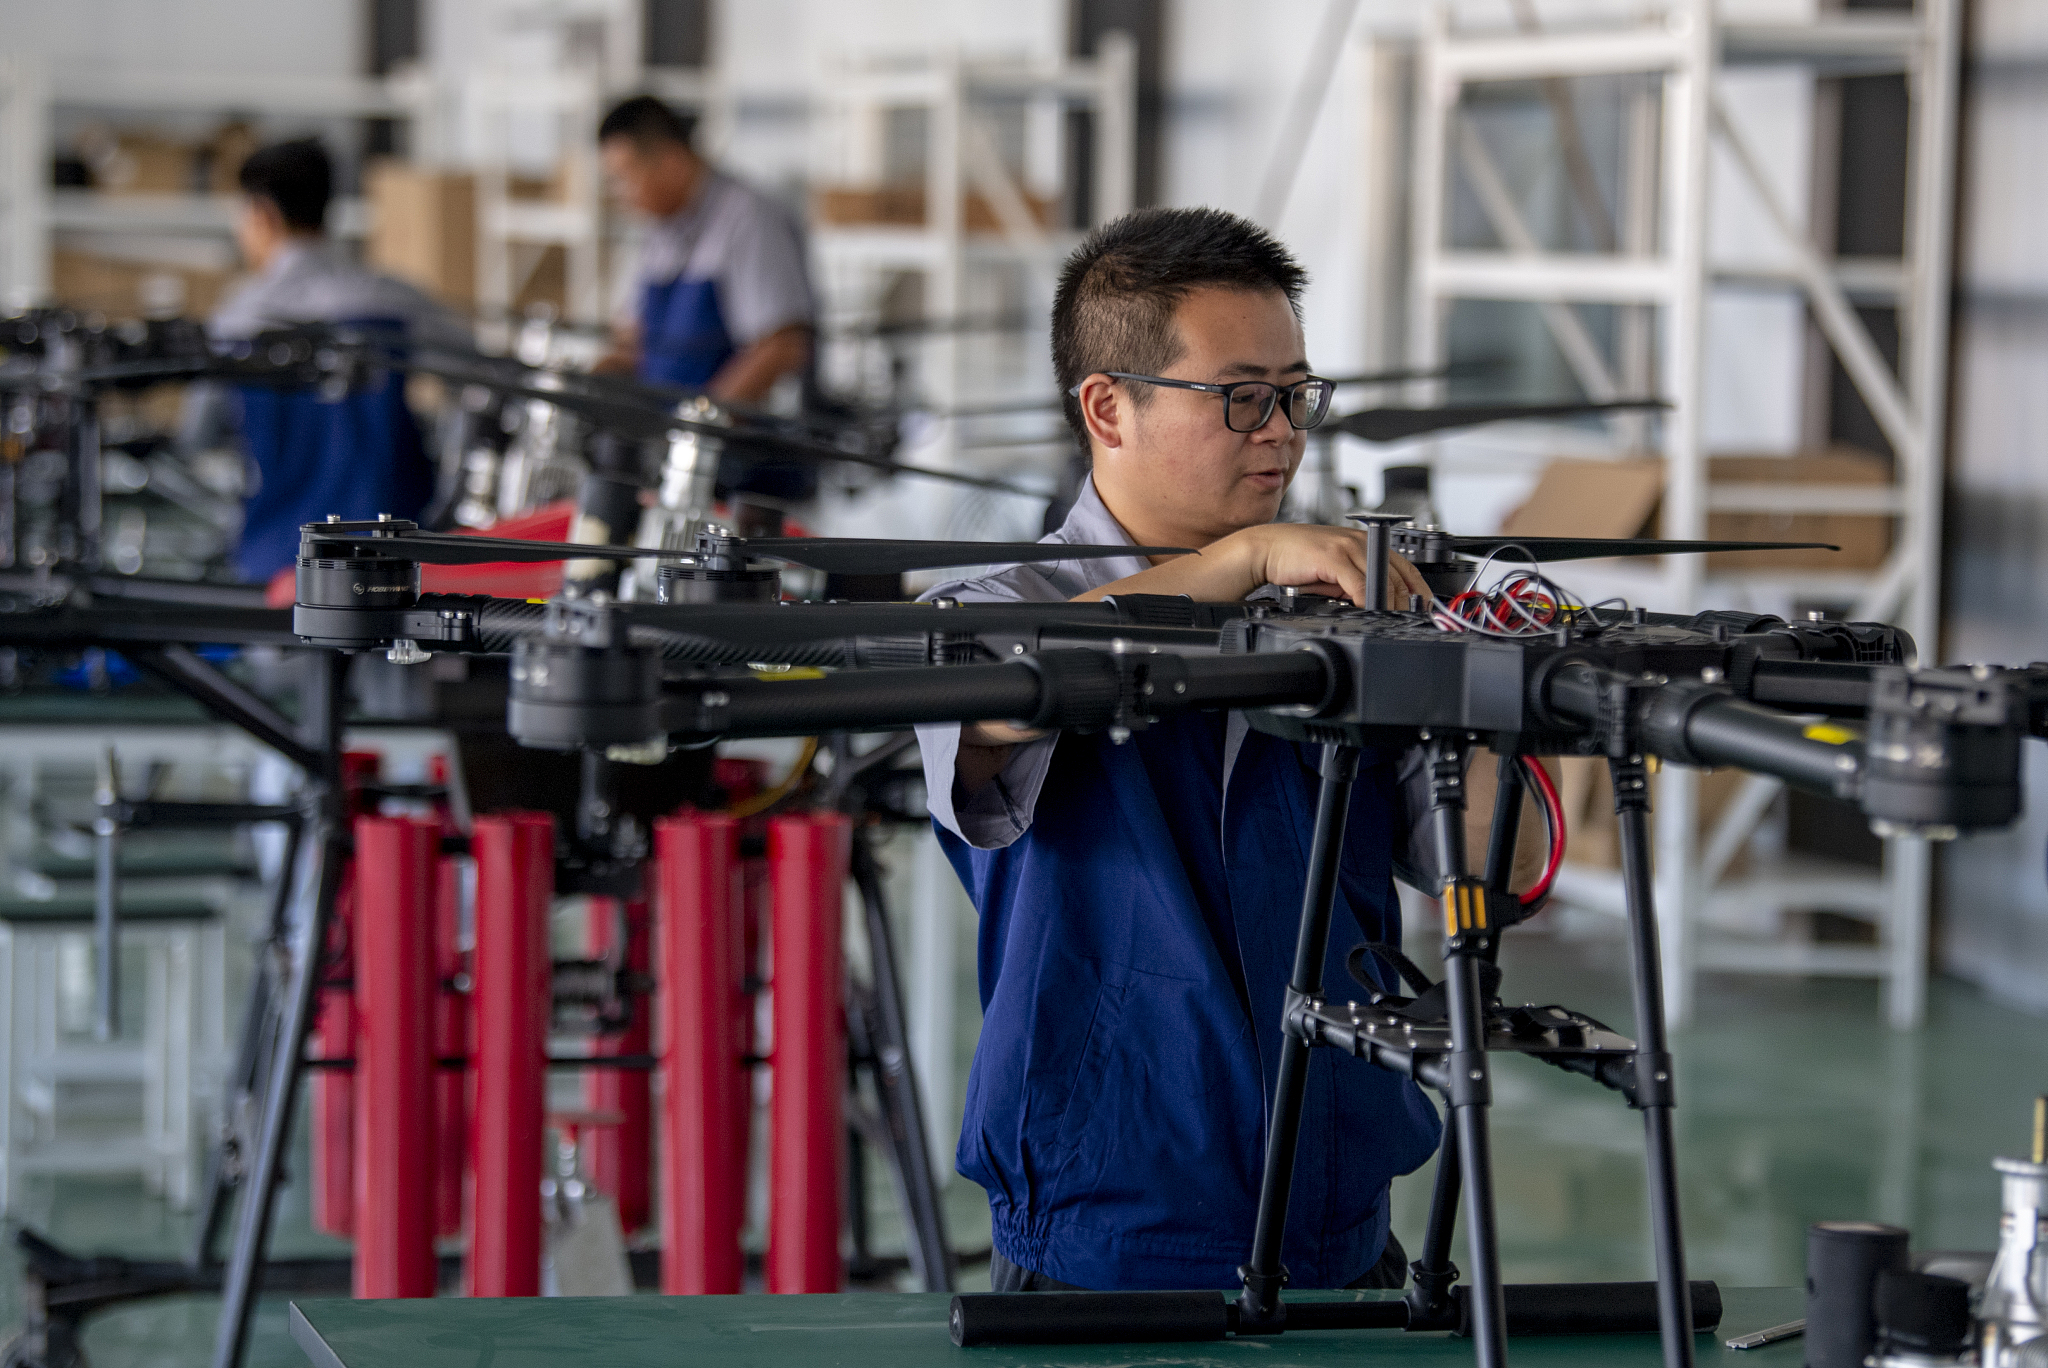 Workers assemble oil-powered drones. /VCG